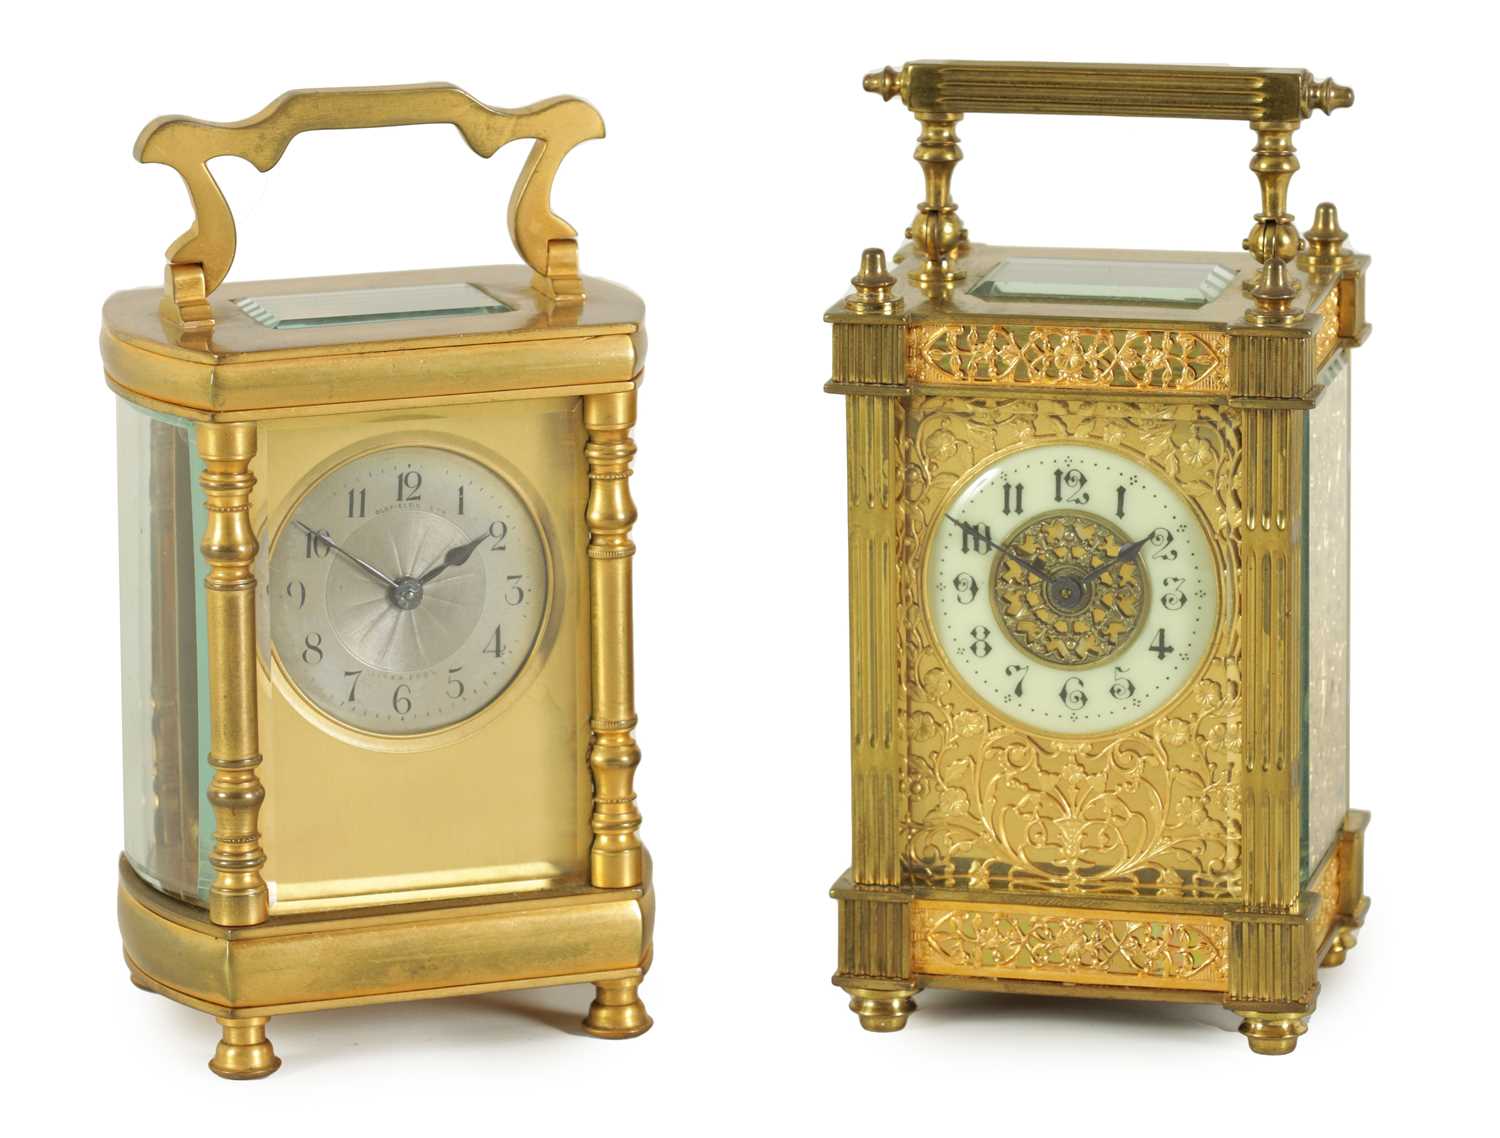 TWO LATE 19TH CENTURY FRENCH CARRIAGE CLOCKS